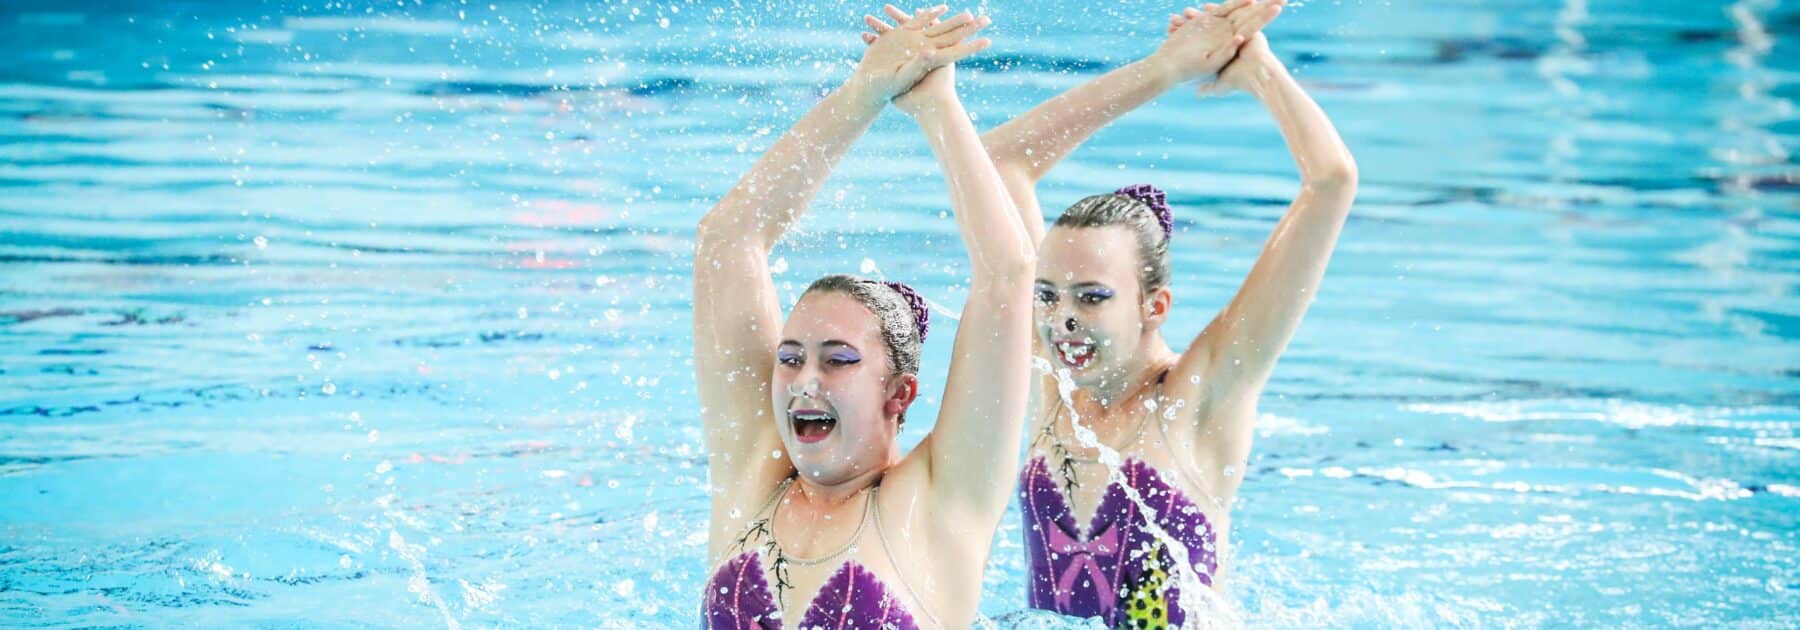 Betty Competes at Synchronised Swimming National Championships